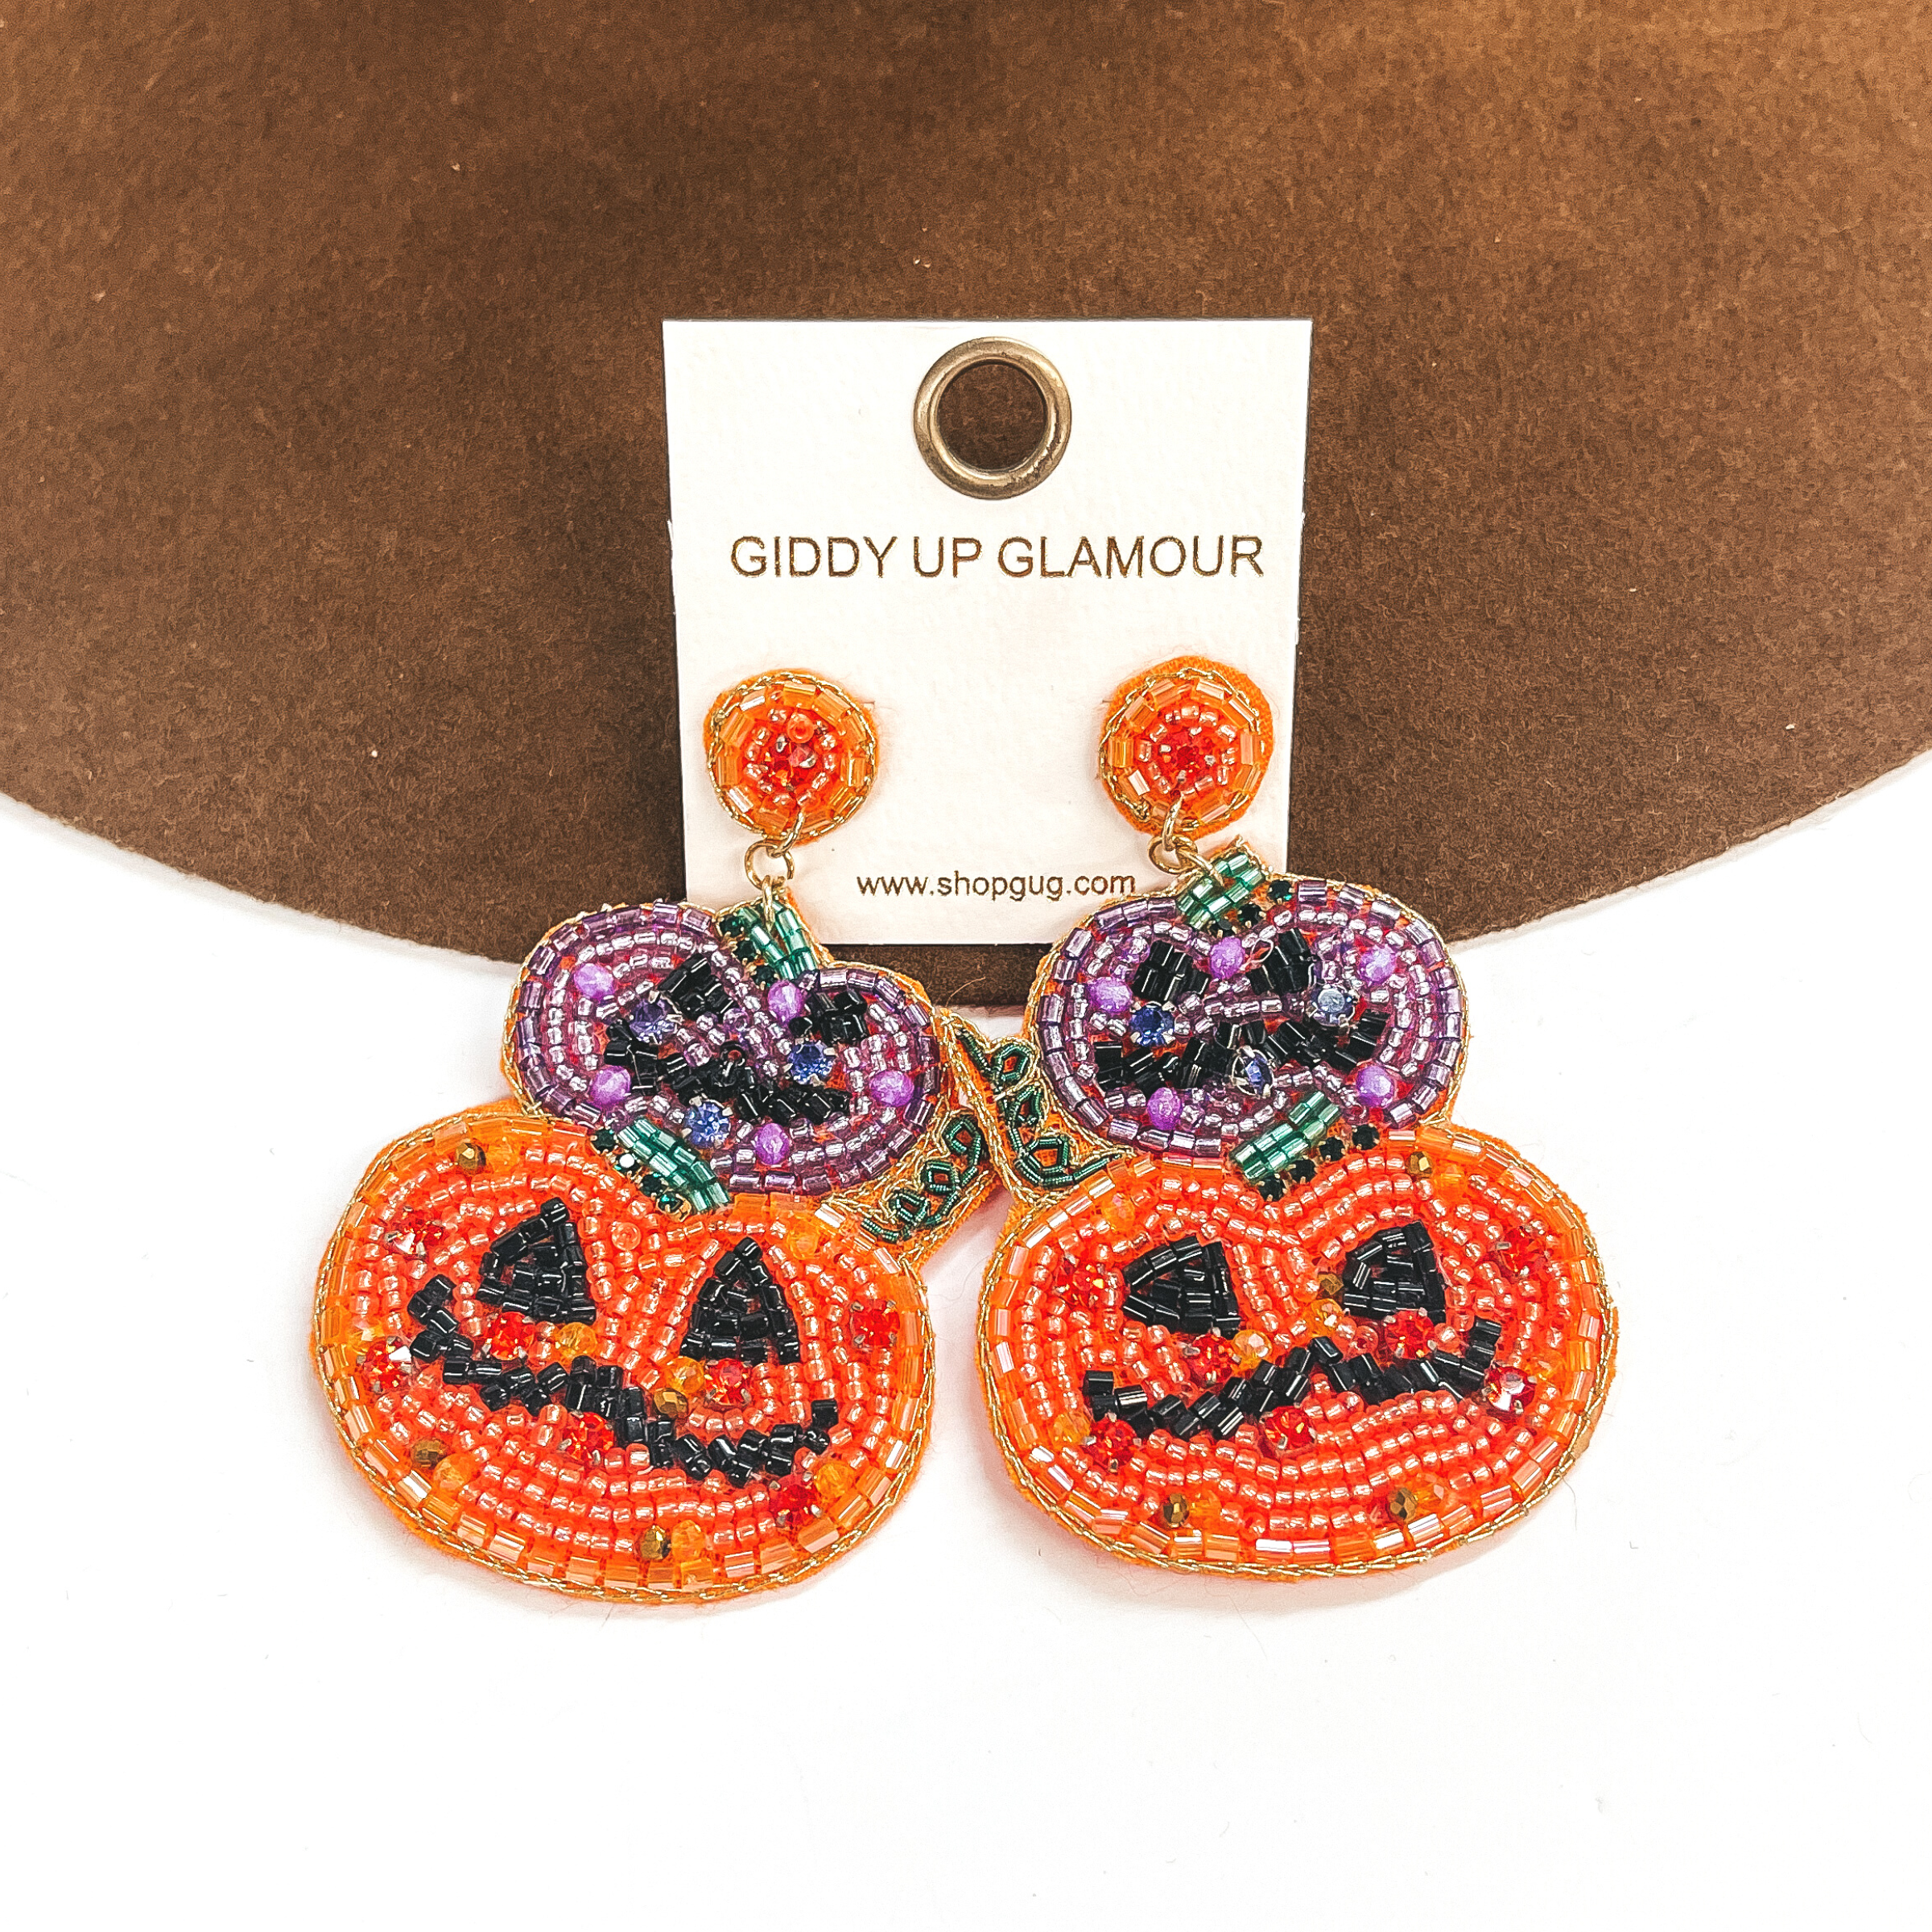 Two Tiered Seedbeaded and Crystal Pumpkin Post Earrings in Orange and Purple - Giddy Up Glamour Boutique